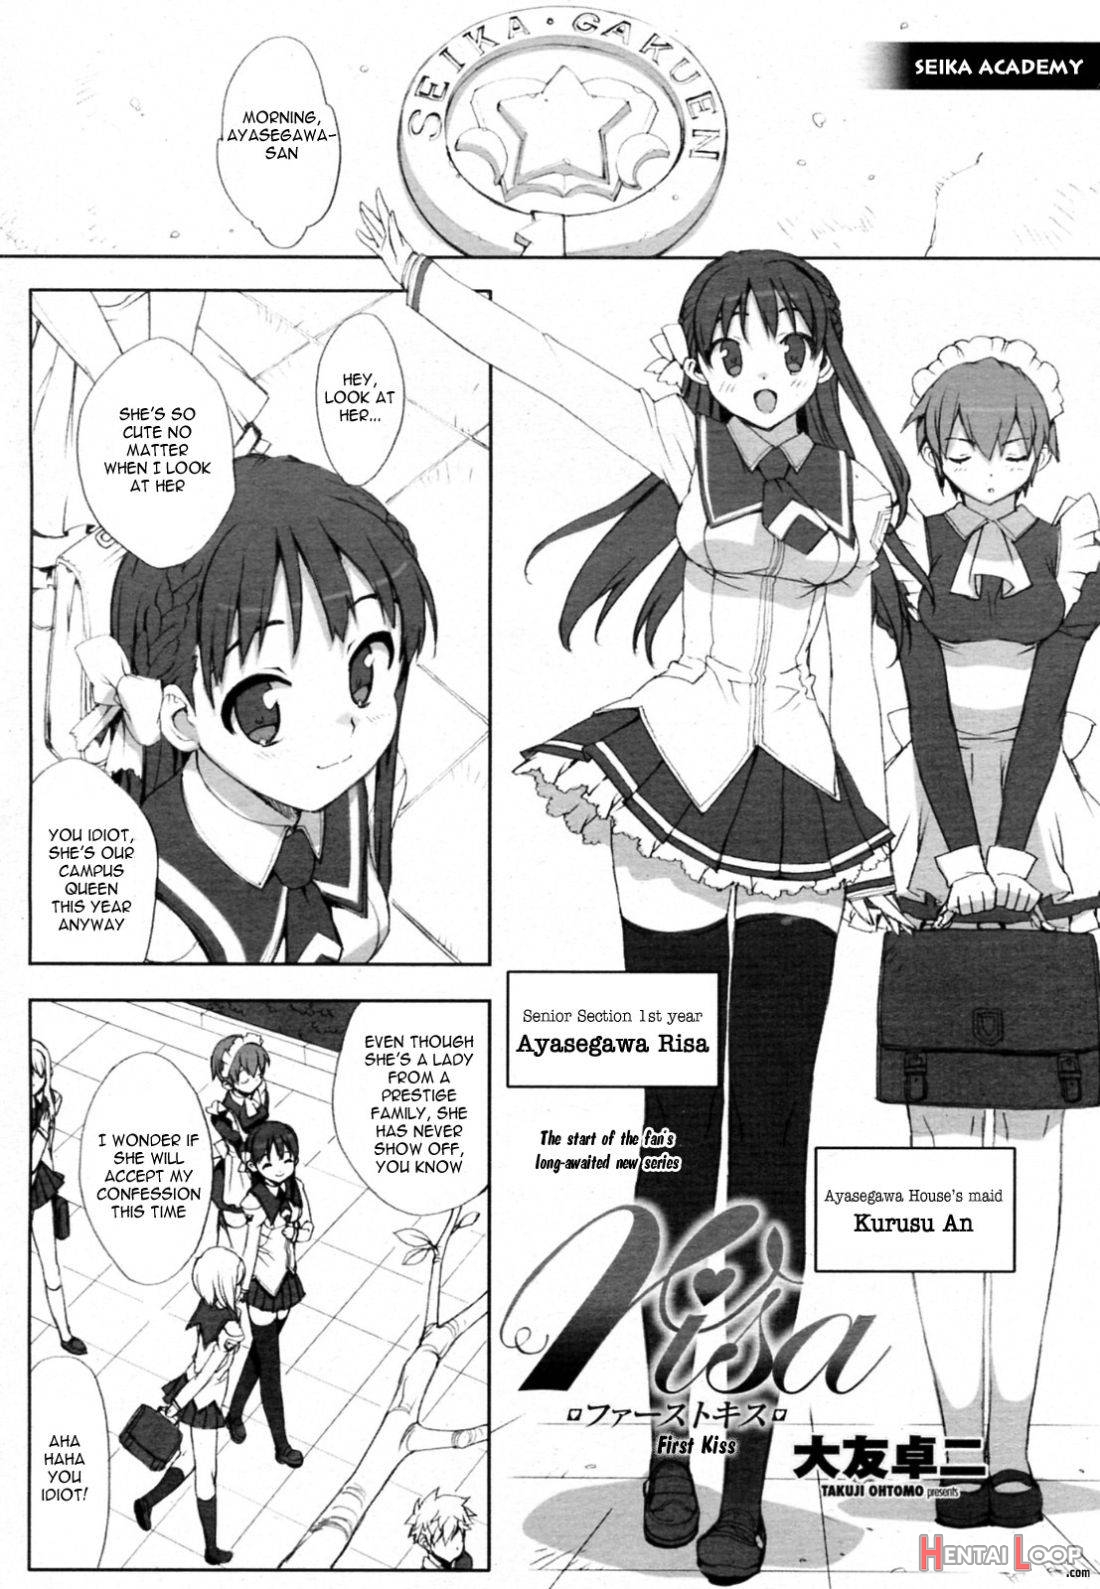 Risa page 2